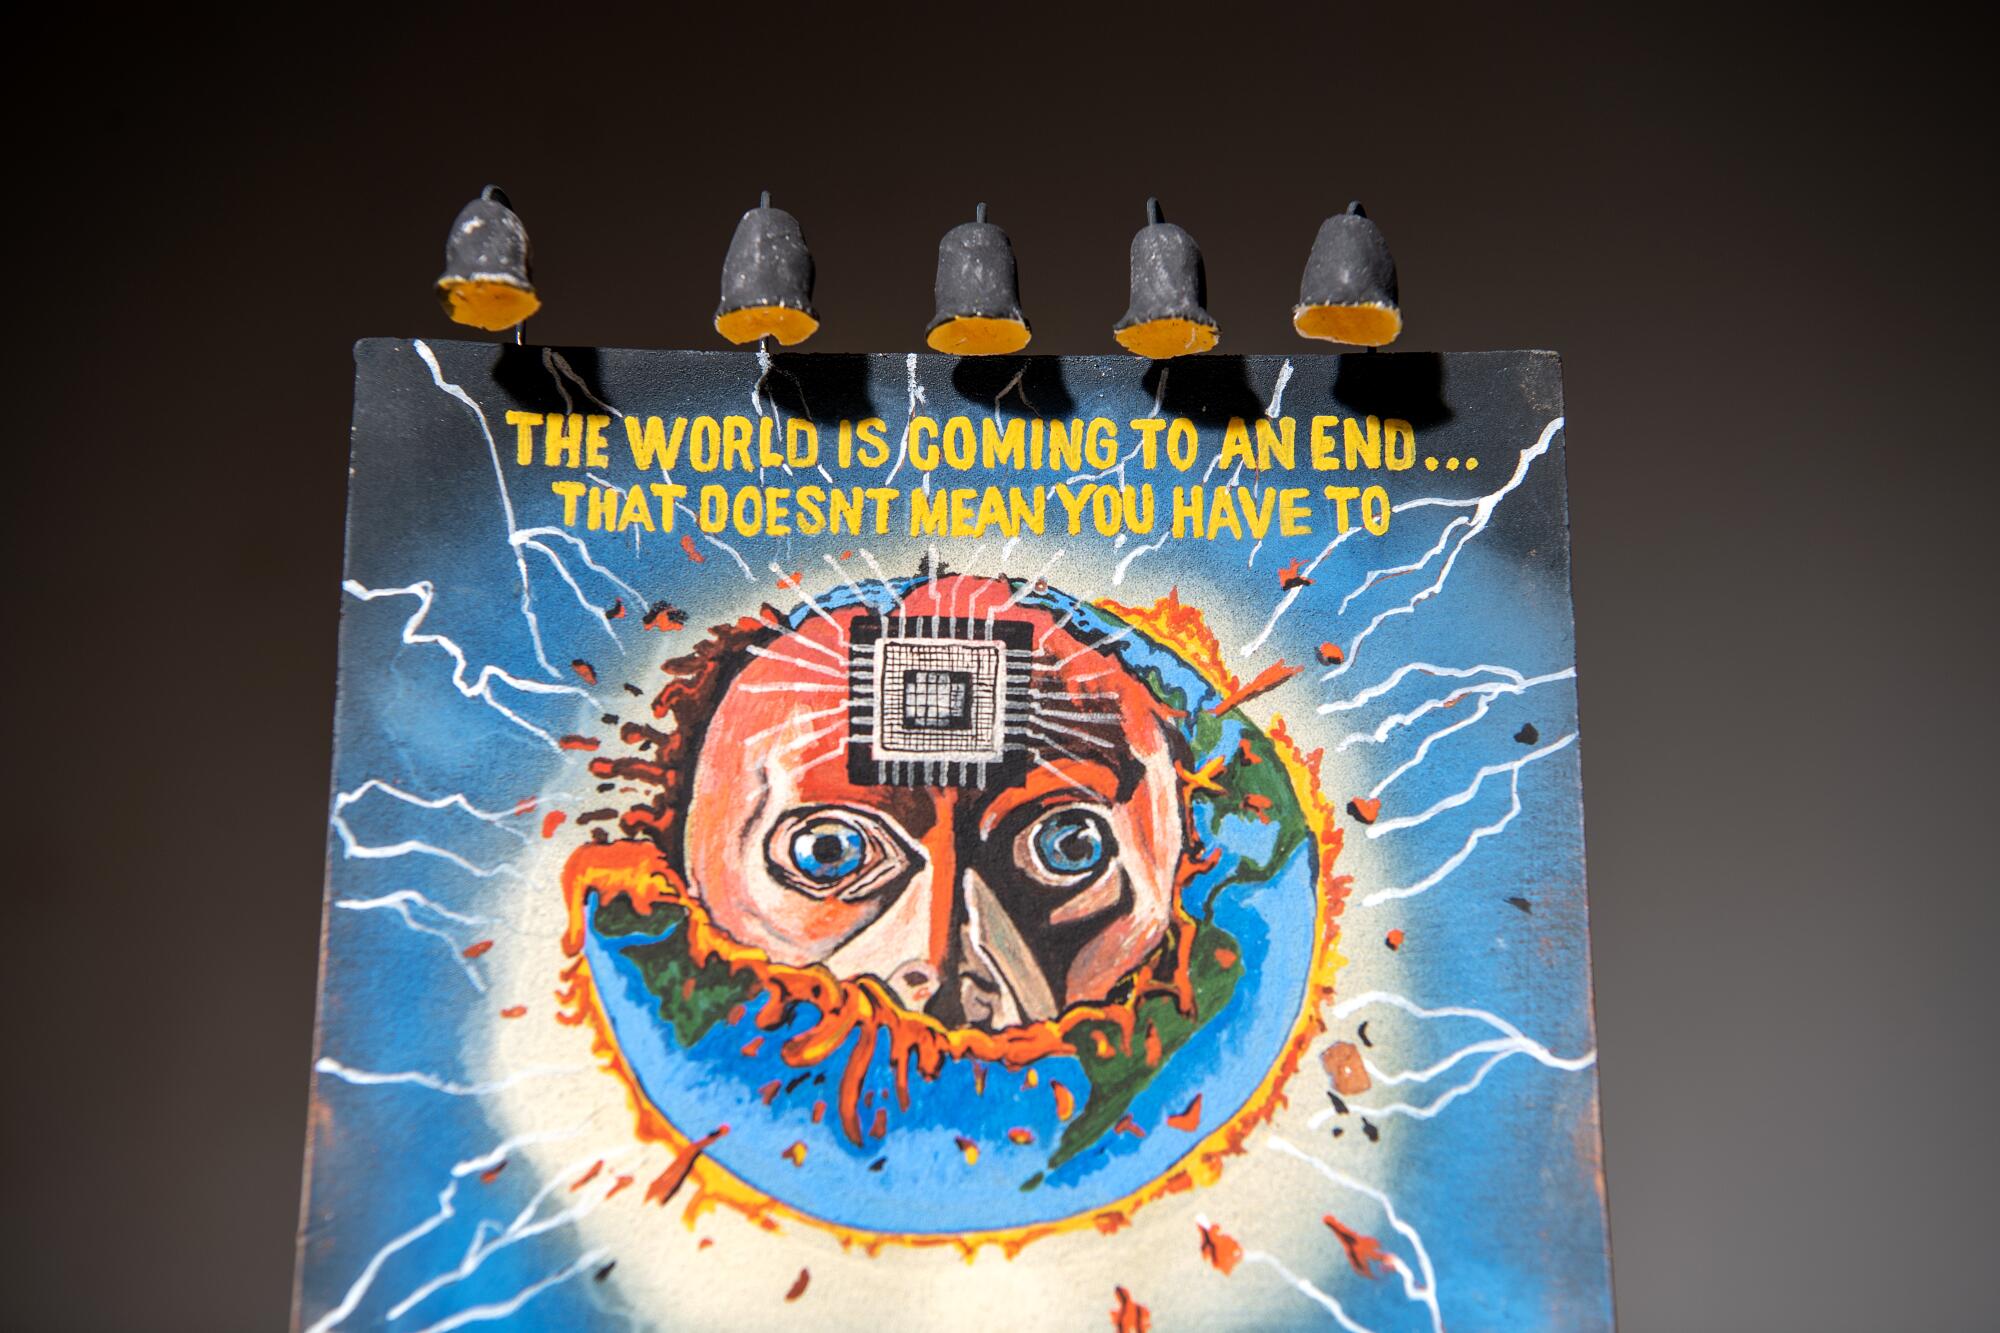 A ceramic billboard advertising "The World Is Coming to an End."